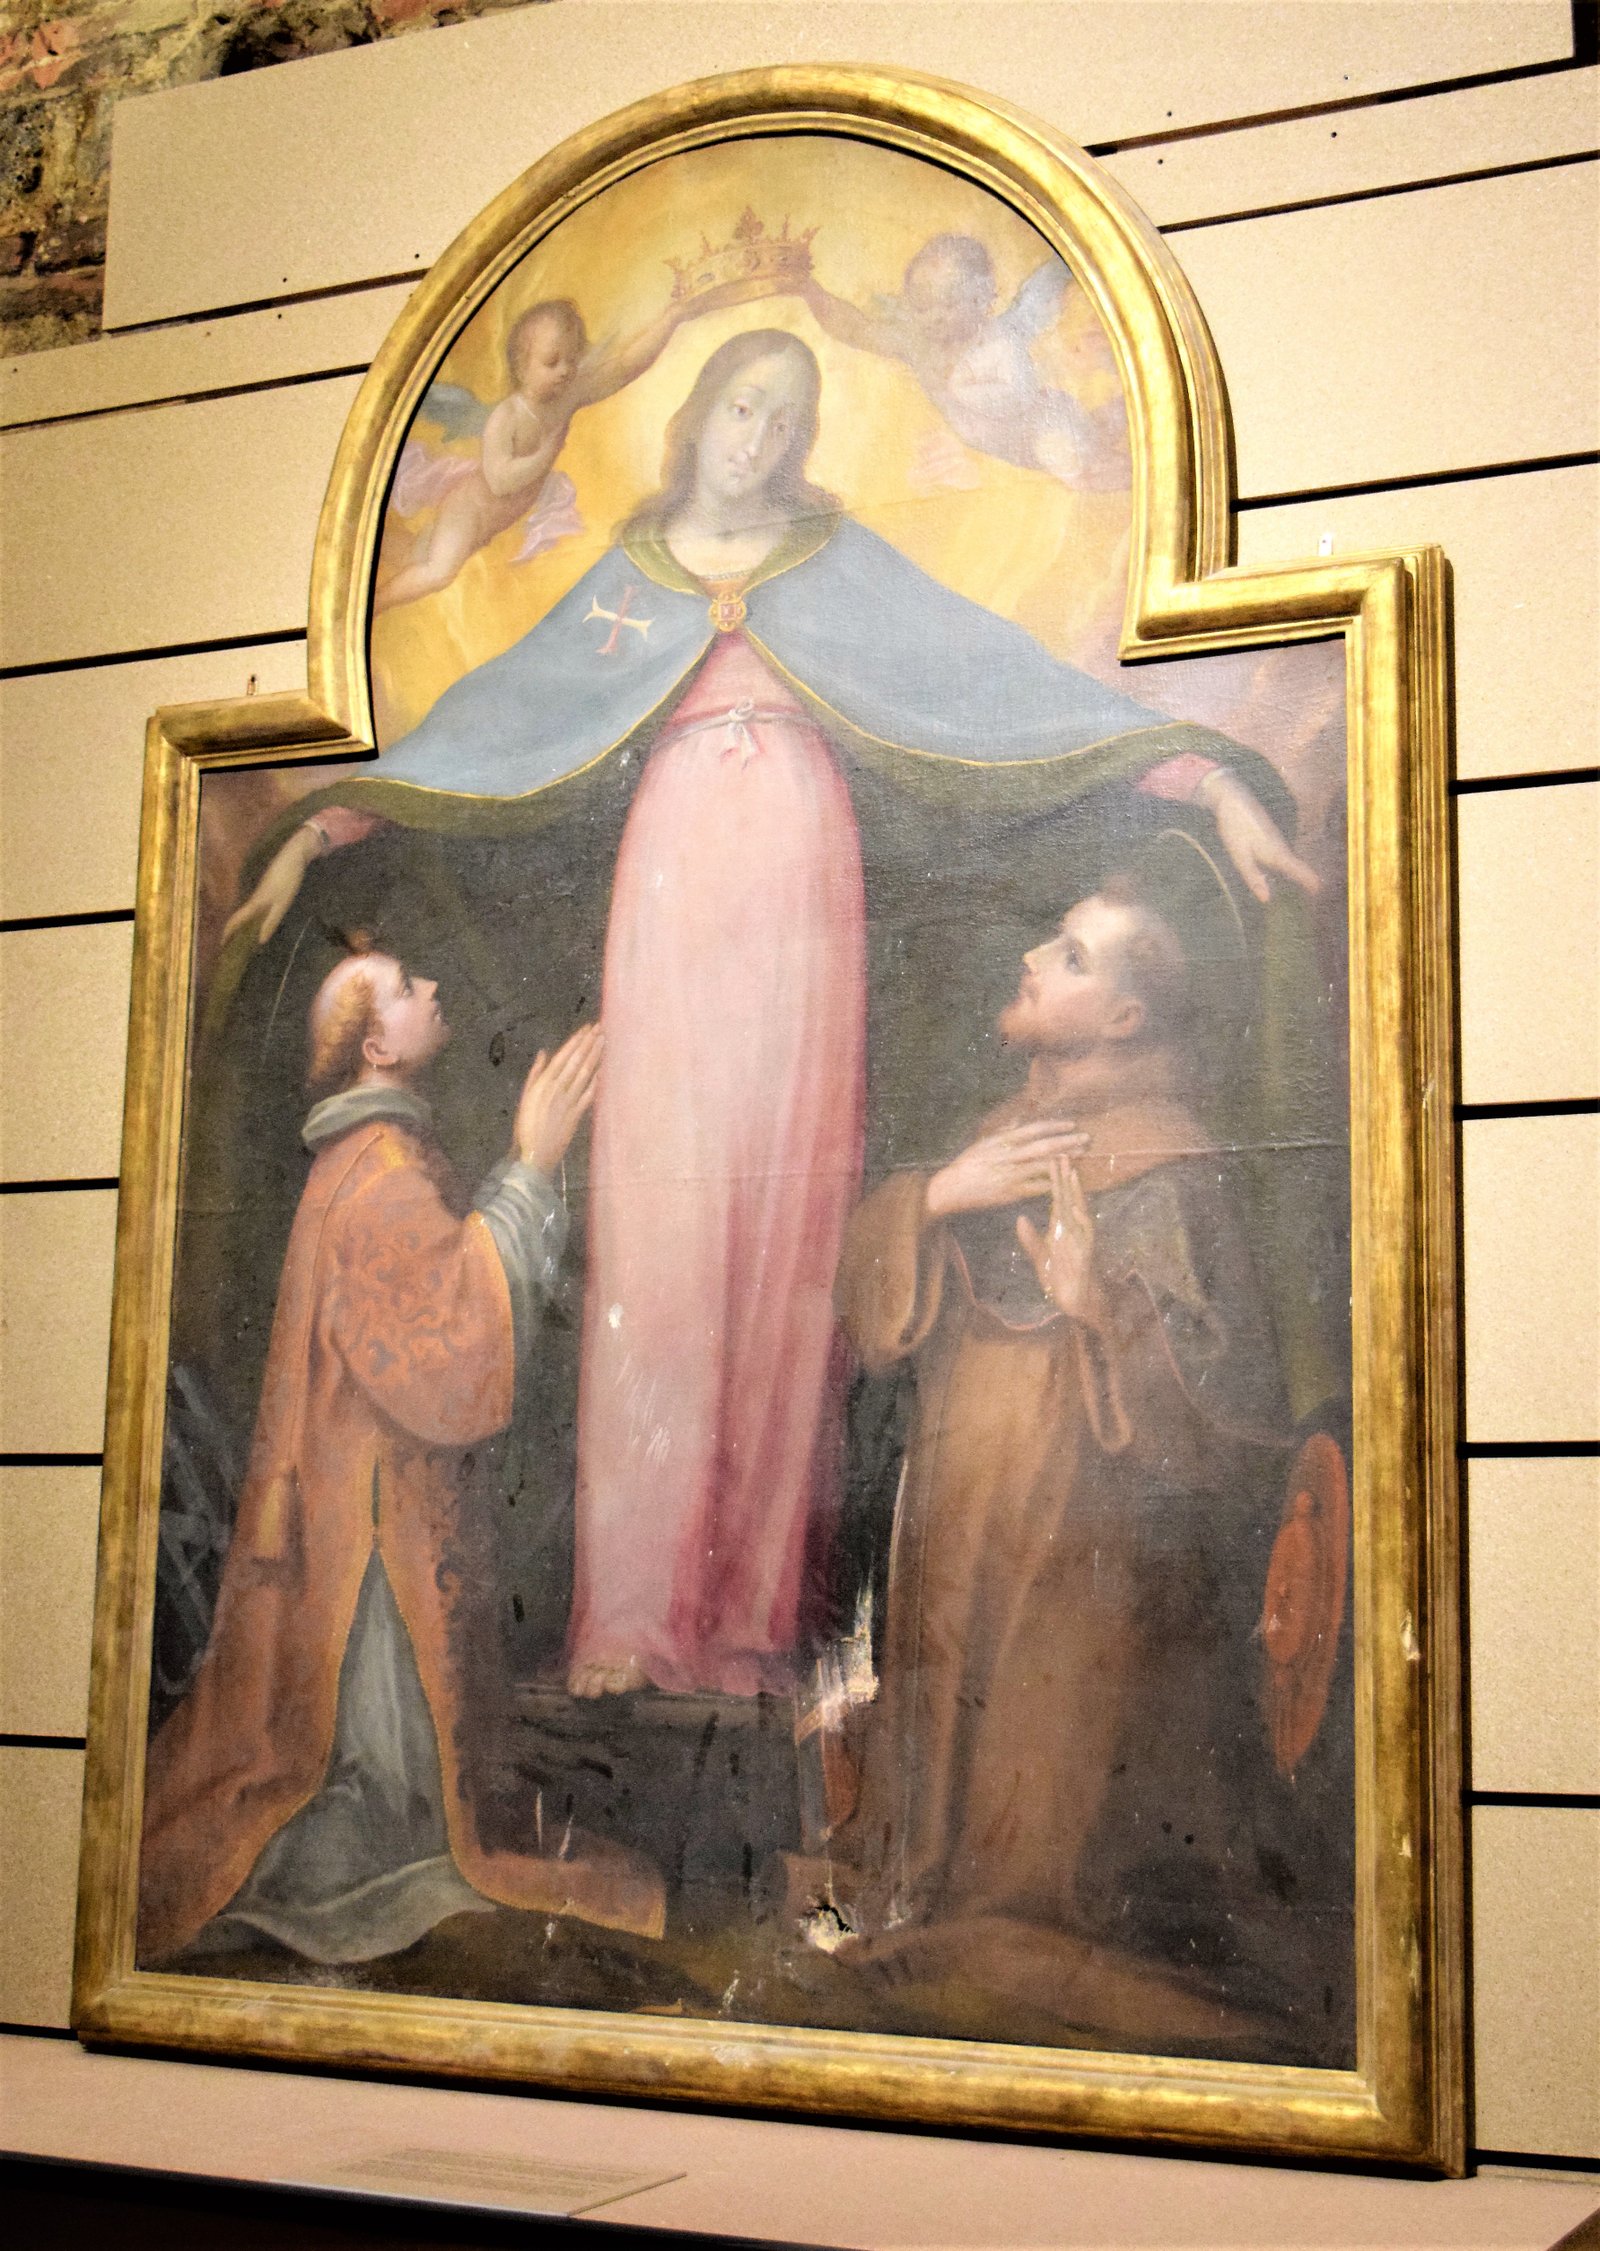 Siena and Norcia, an incredible painting that survived the earthquake - ouritalianjourney.com